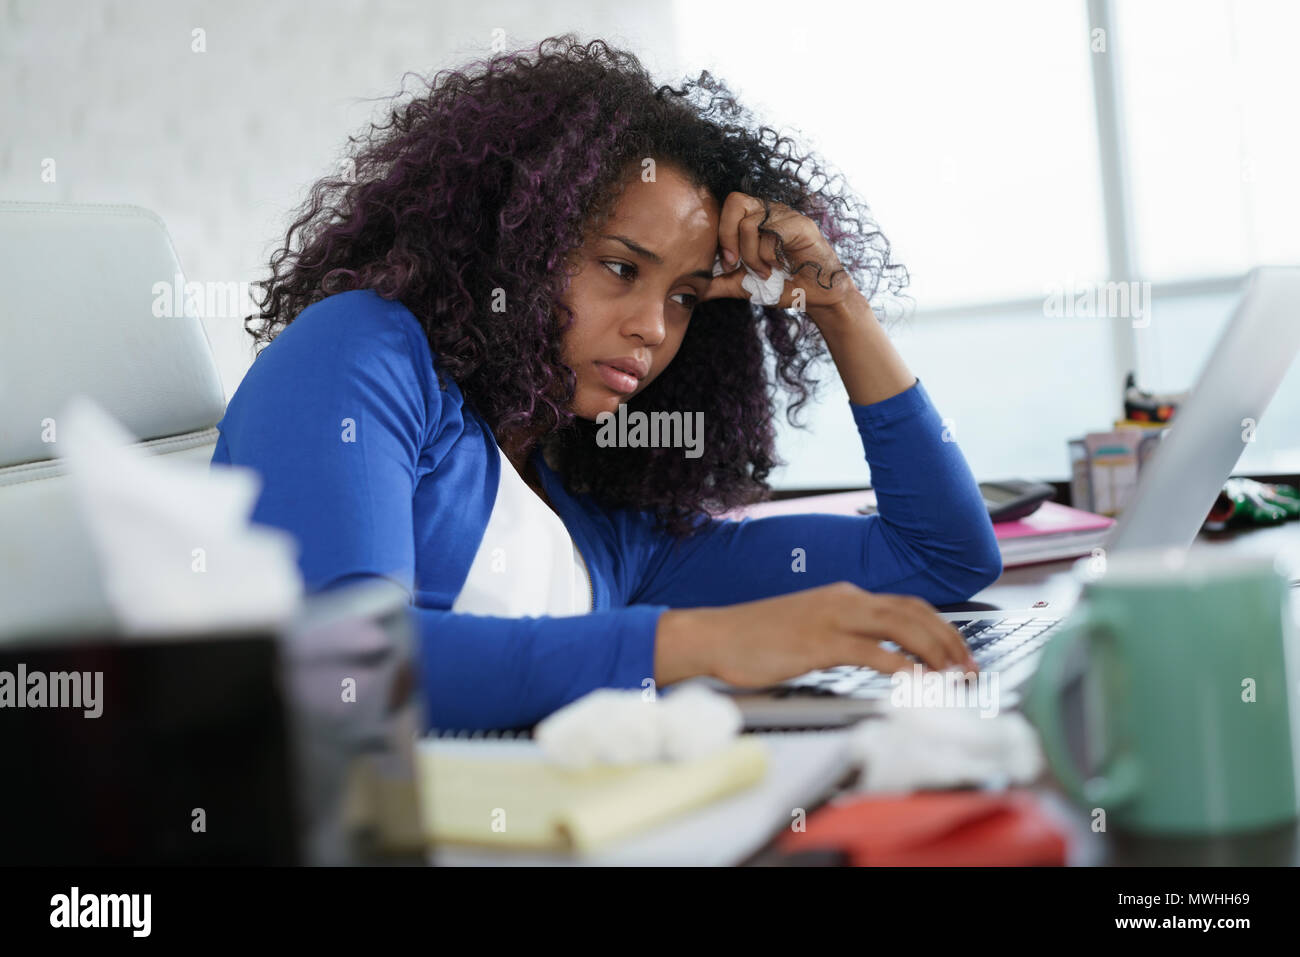 Sick african american girl working from home office. Ill young black woman with cold, sitting at desk with laptop computer and sneezing for allergy. Stock Photo